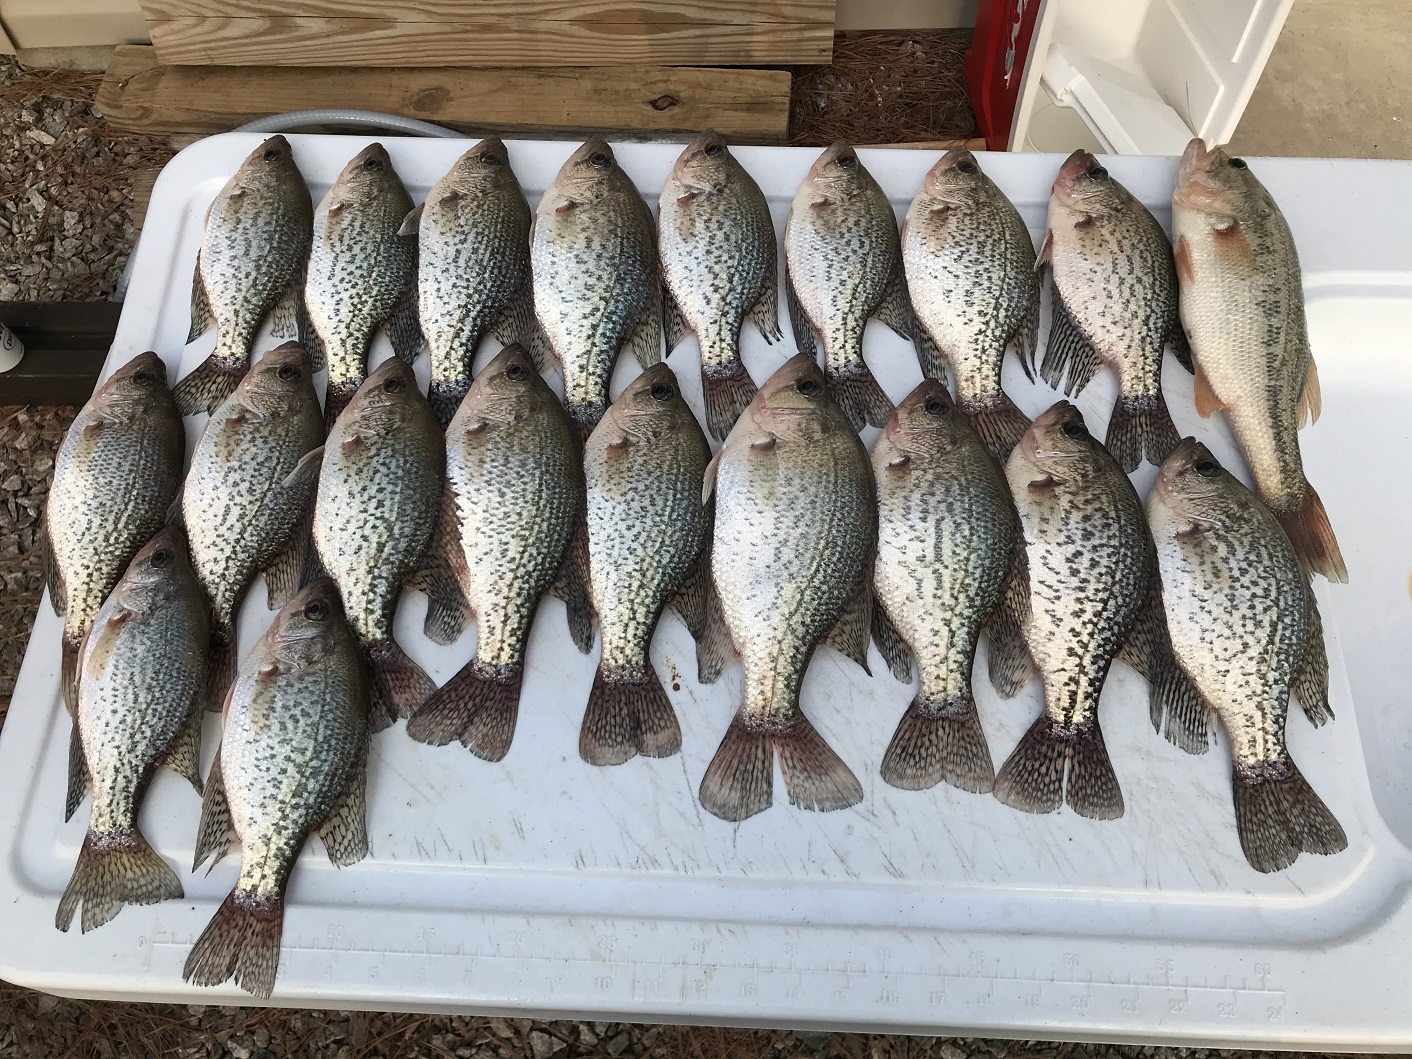 Wild Life Adventures - Vertical Jigging Crappie - Gifts - Hyco Lake Magazine